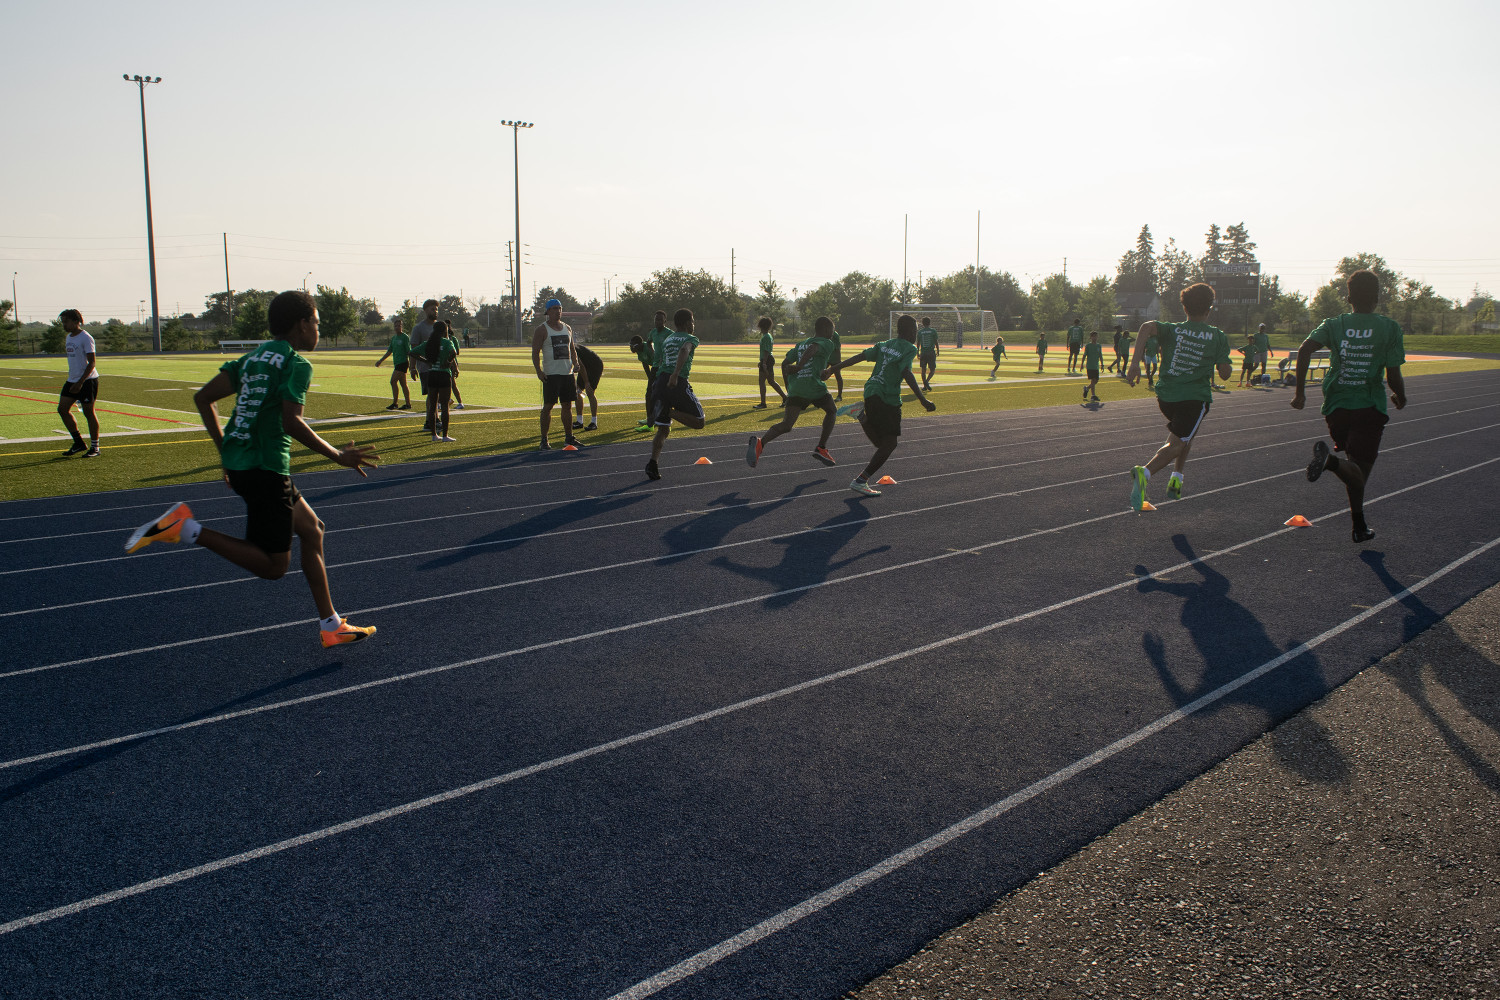 Brampton Racers Track Club sets students up for success not just in sports, but in life too